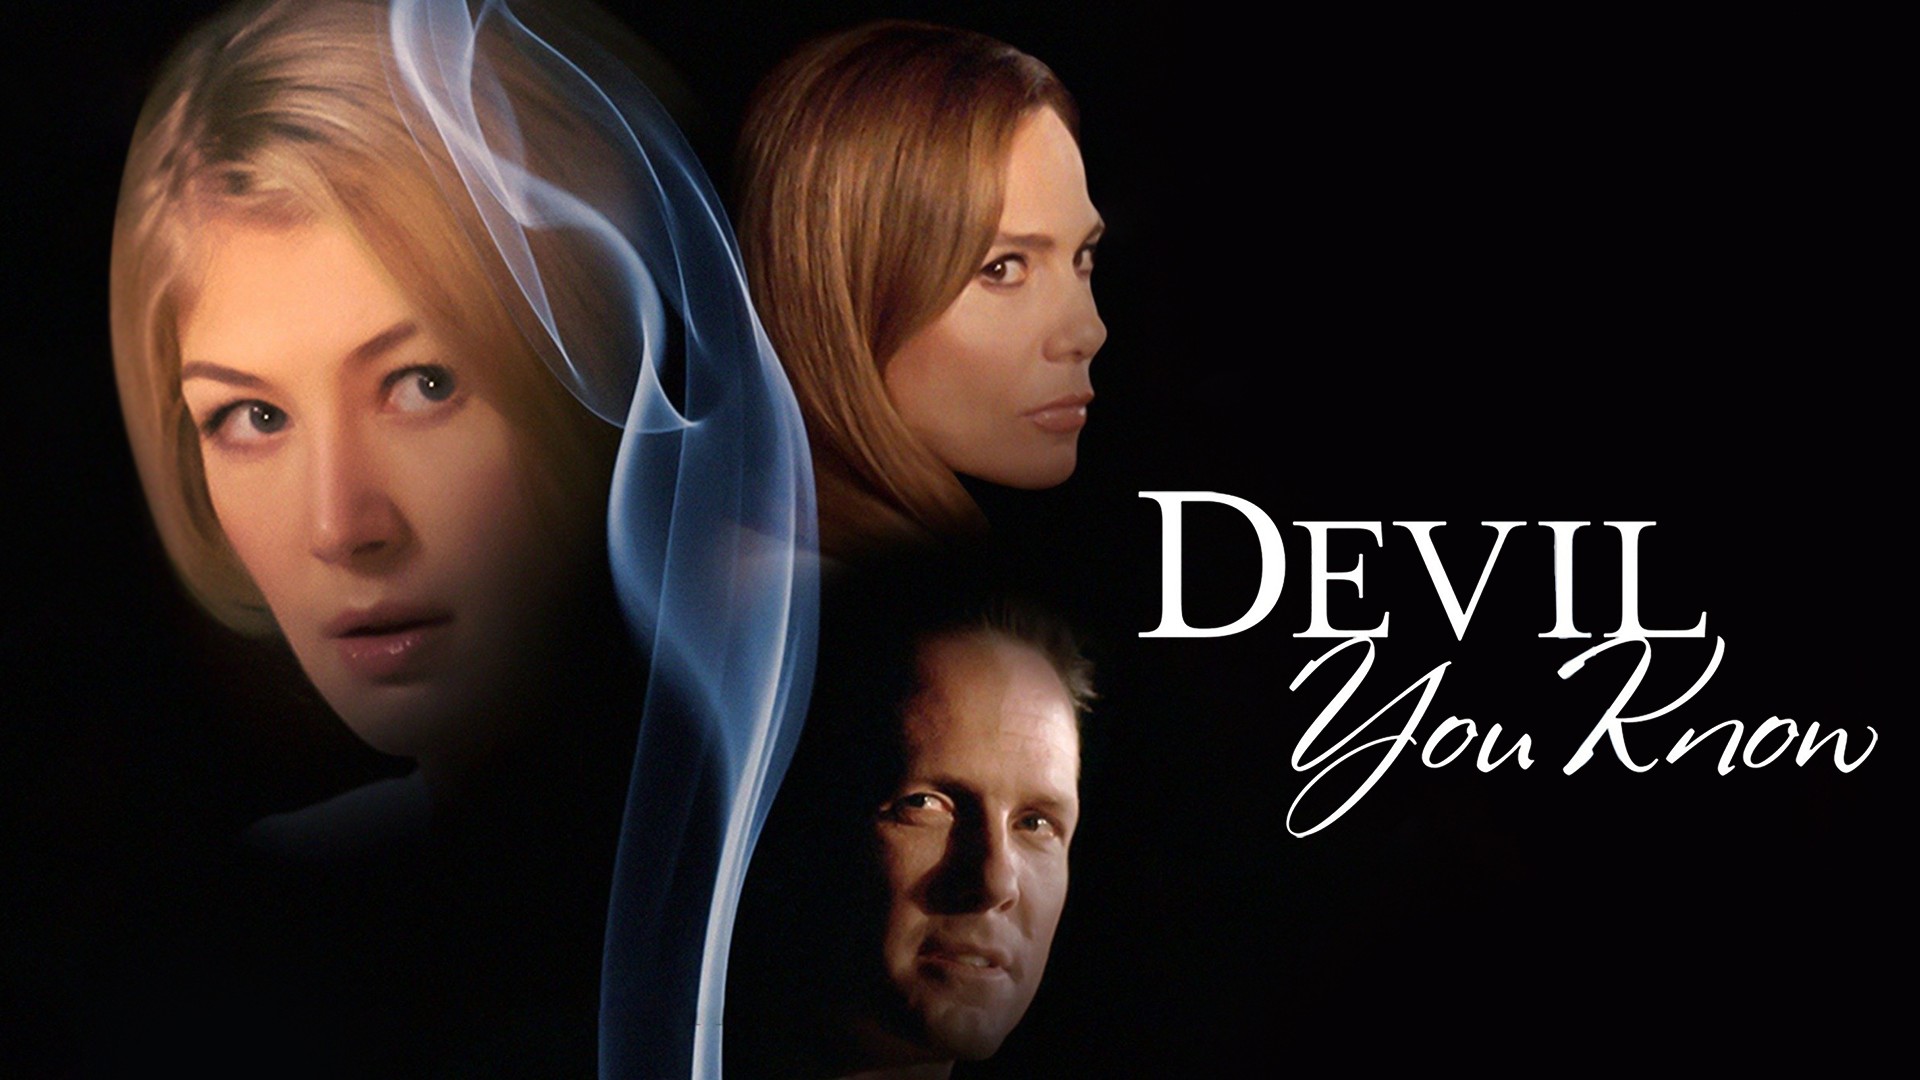 The Devil You Know: Season 1 - TV on Google Play